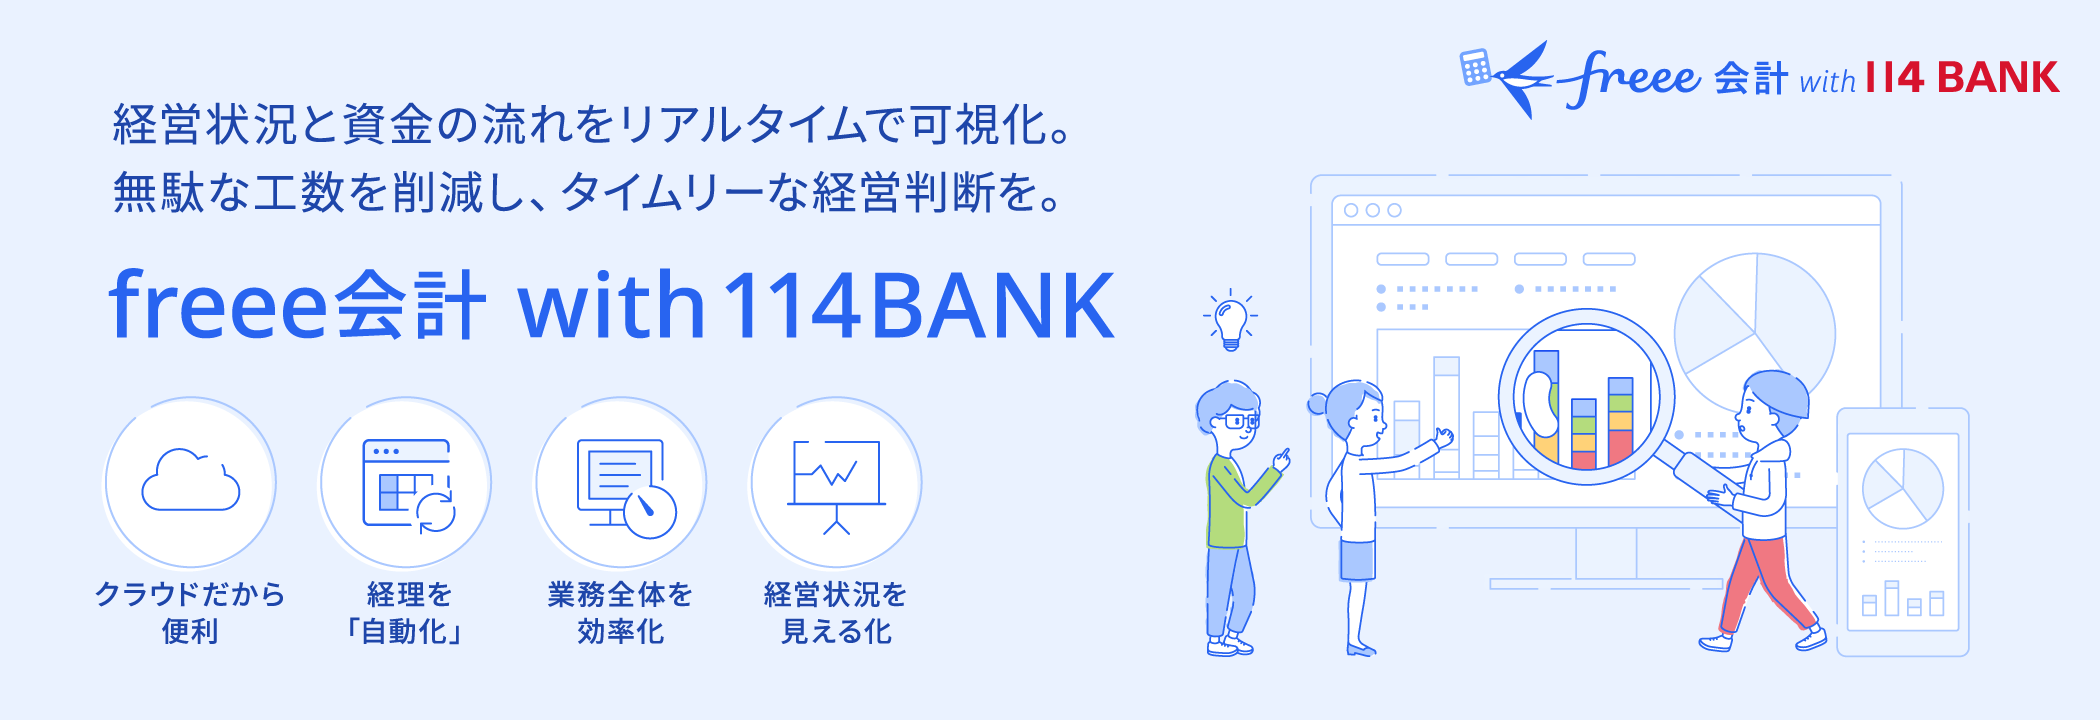 freee会計 with 114BANK